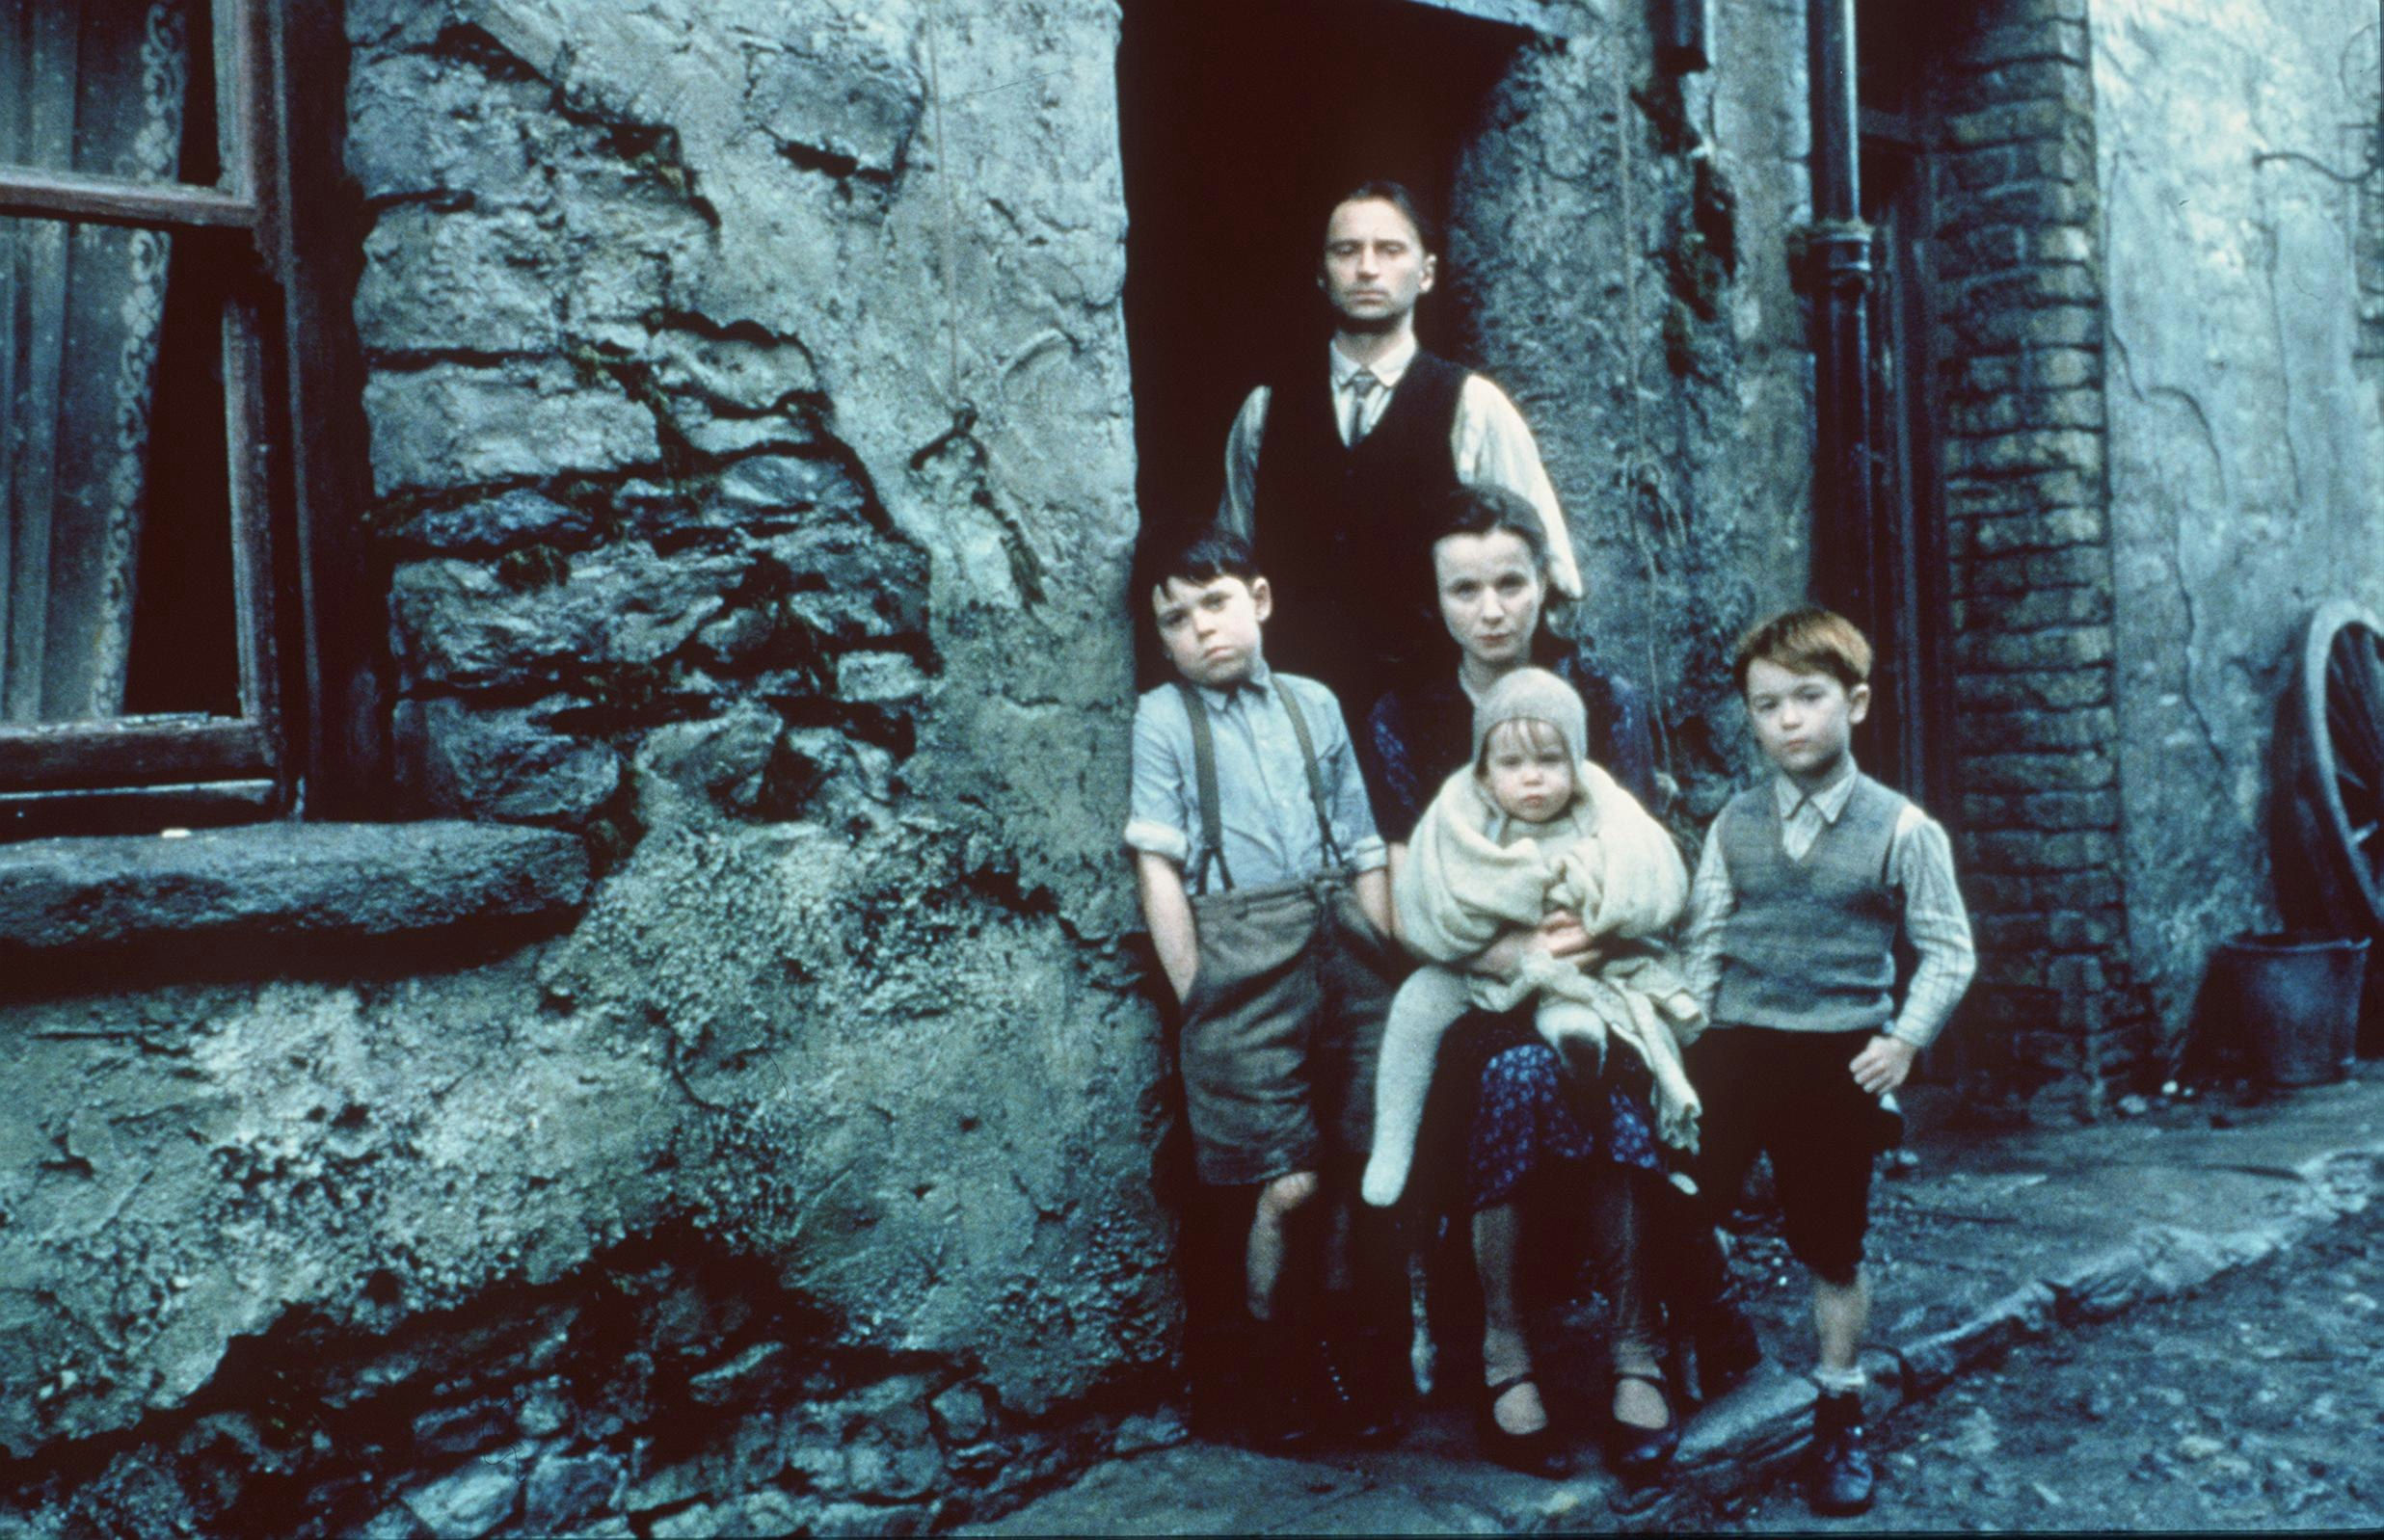 A still from the 1999 film adaptation of "Angela's Ashes," showing the actors cast to play author Frank McCourt's family